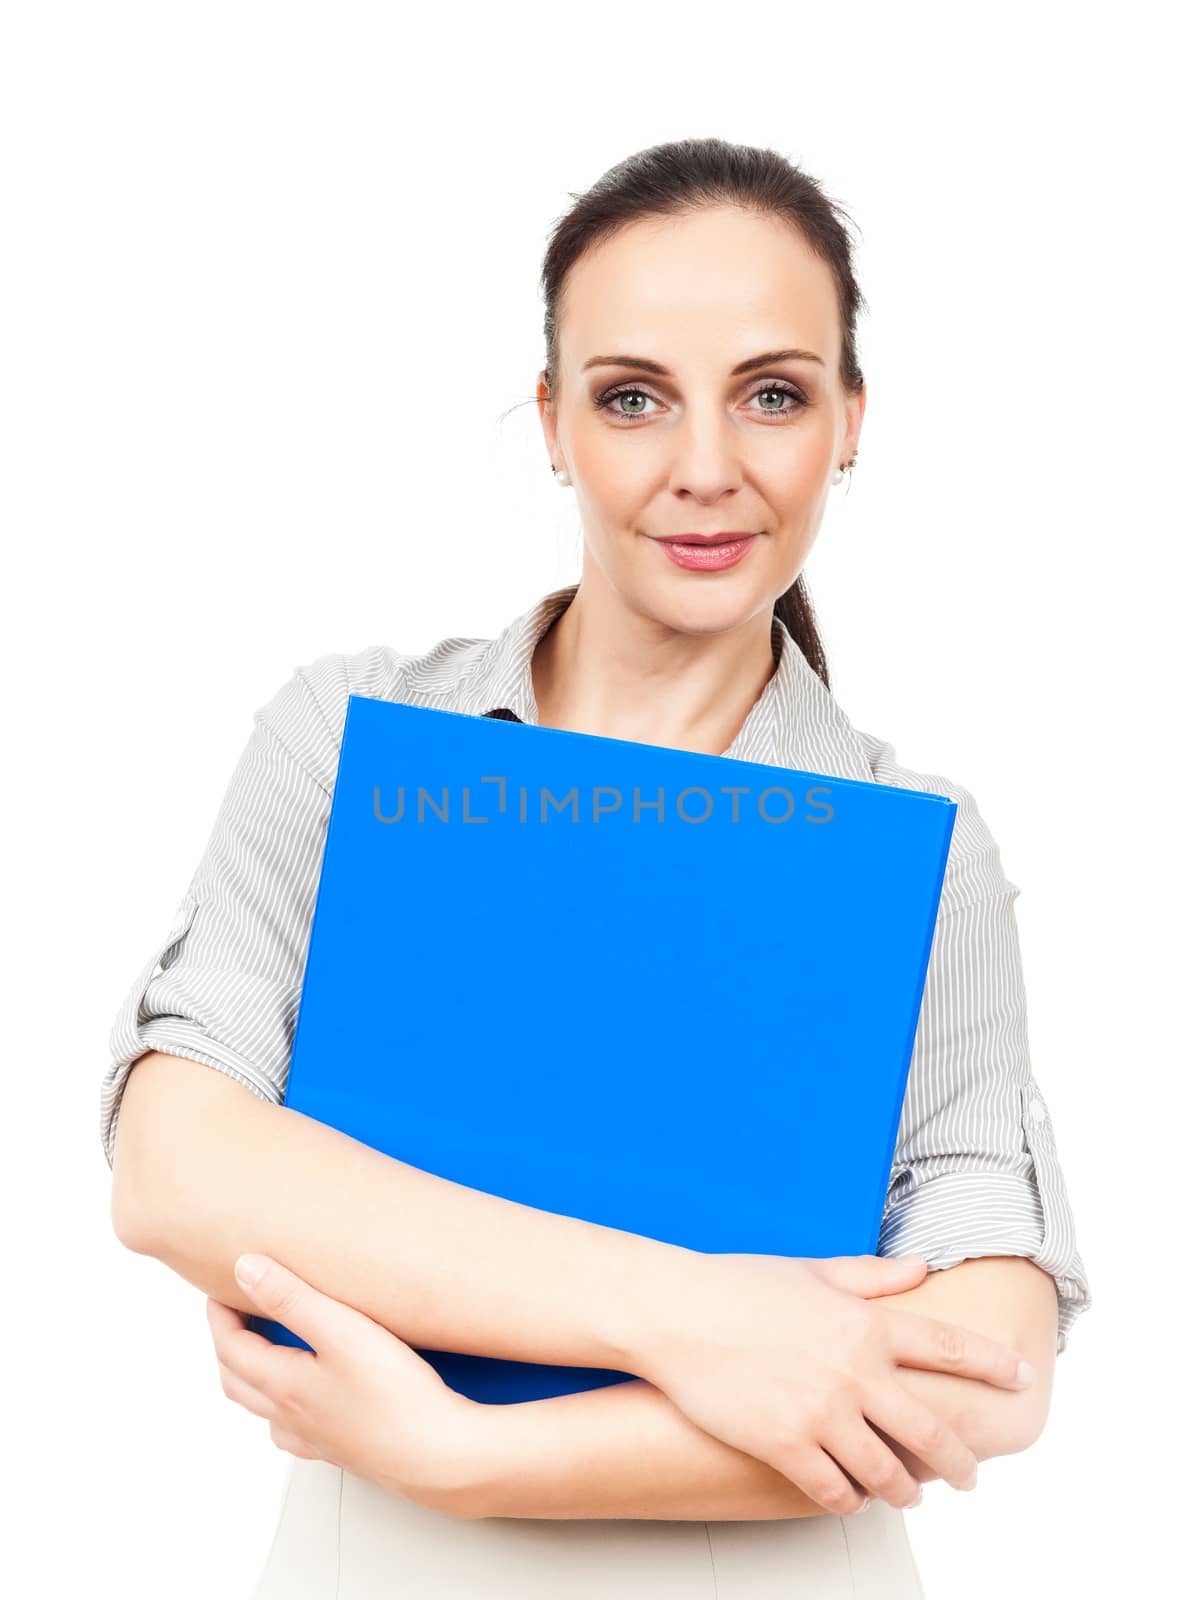 An image of a business woman with a blue folder